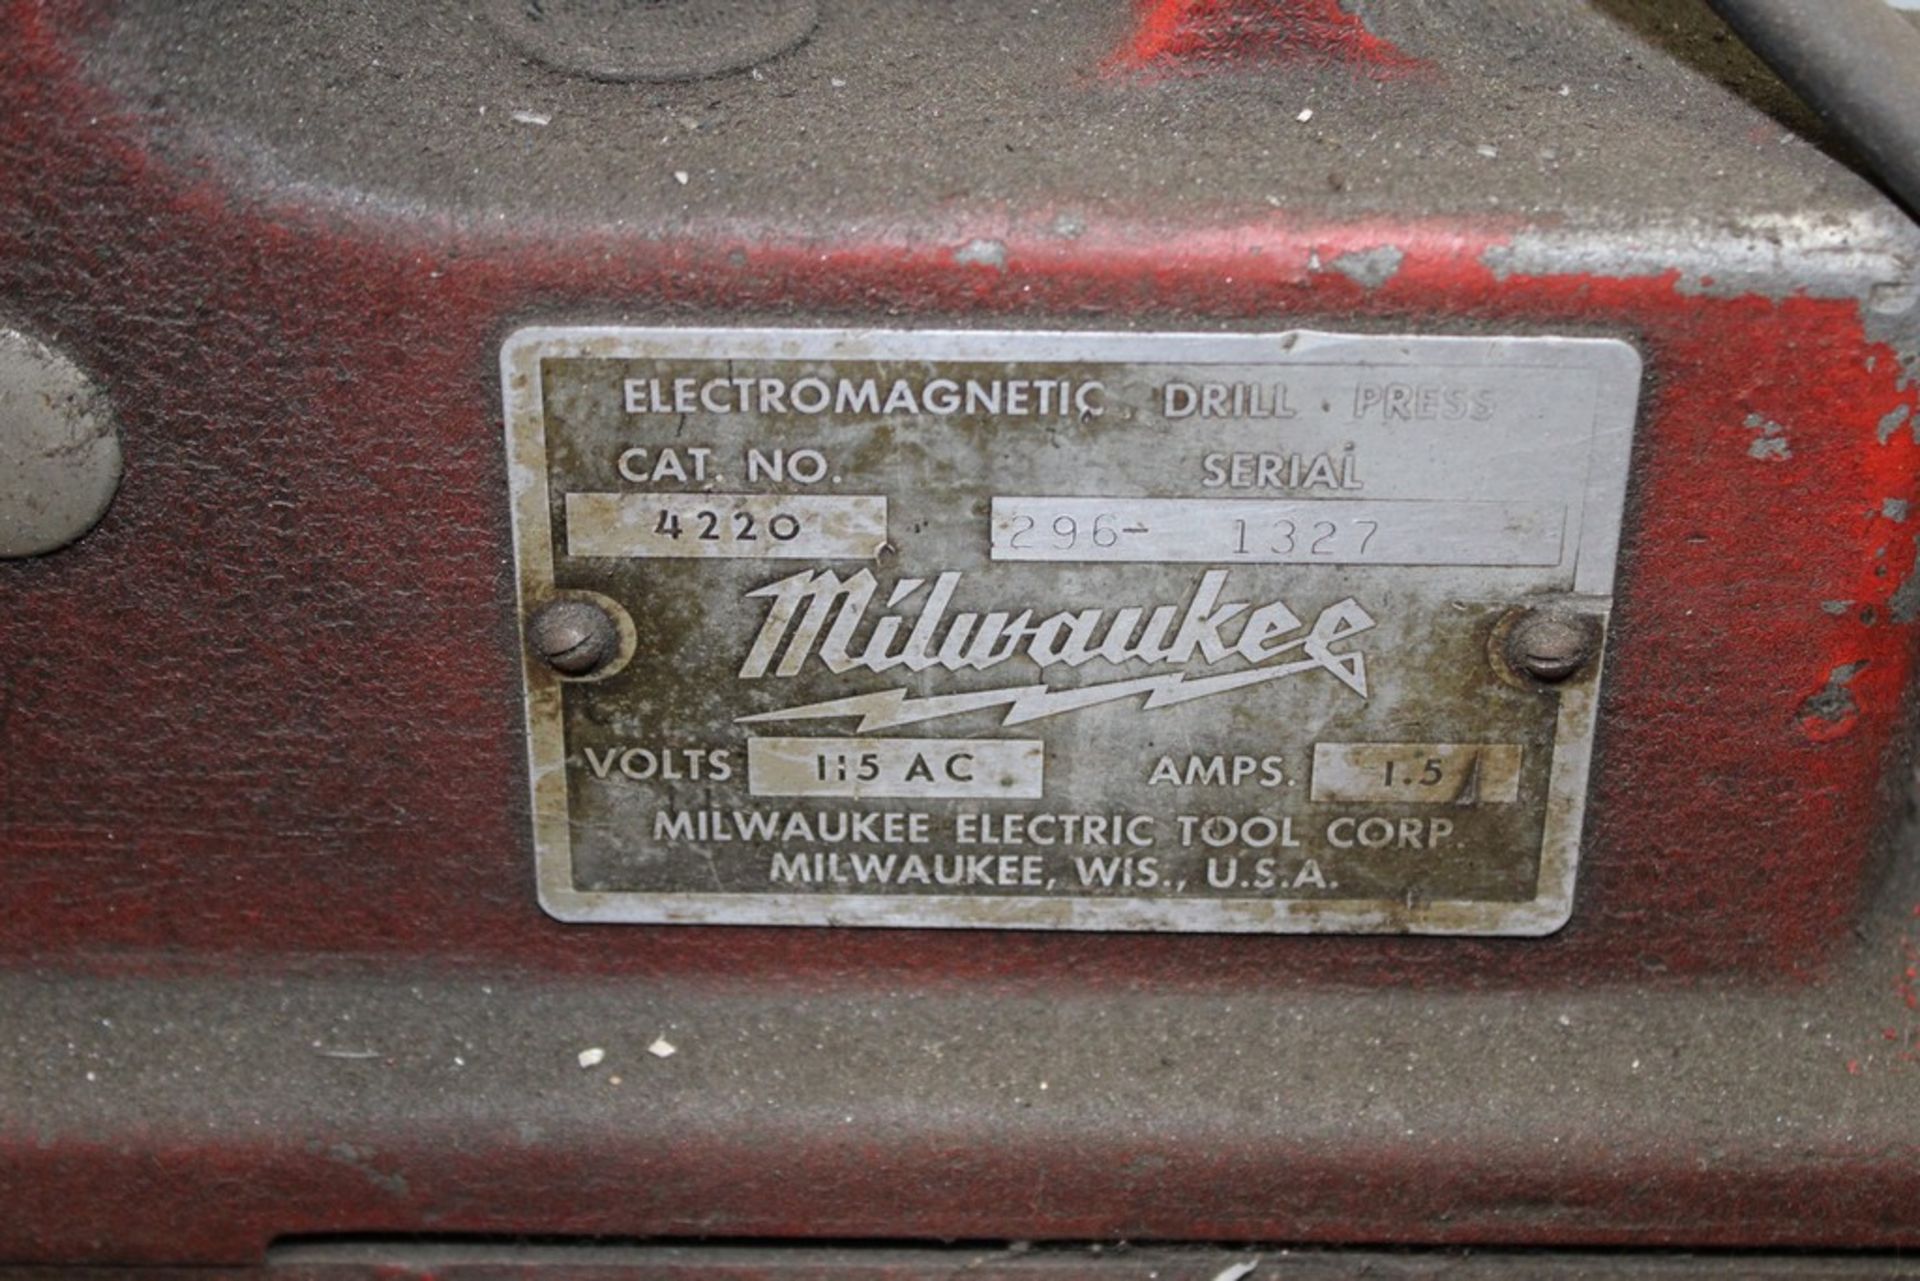 MILWAUKEE NO. 4220 ELECTROMAGNETIC DRILL PRESS - Image 2 of 3